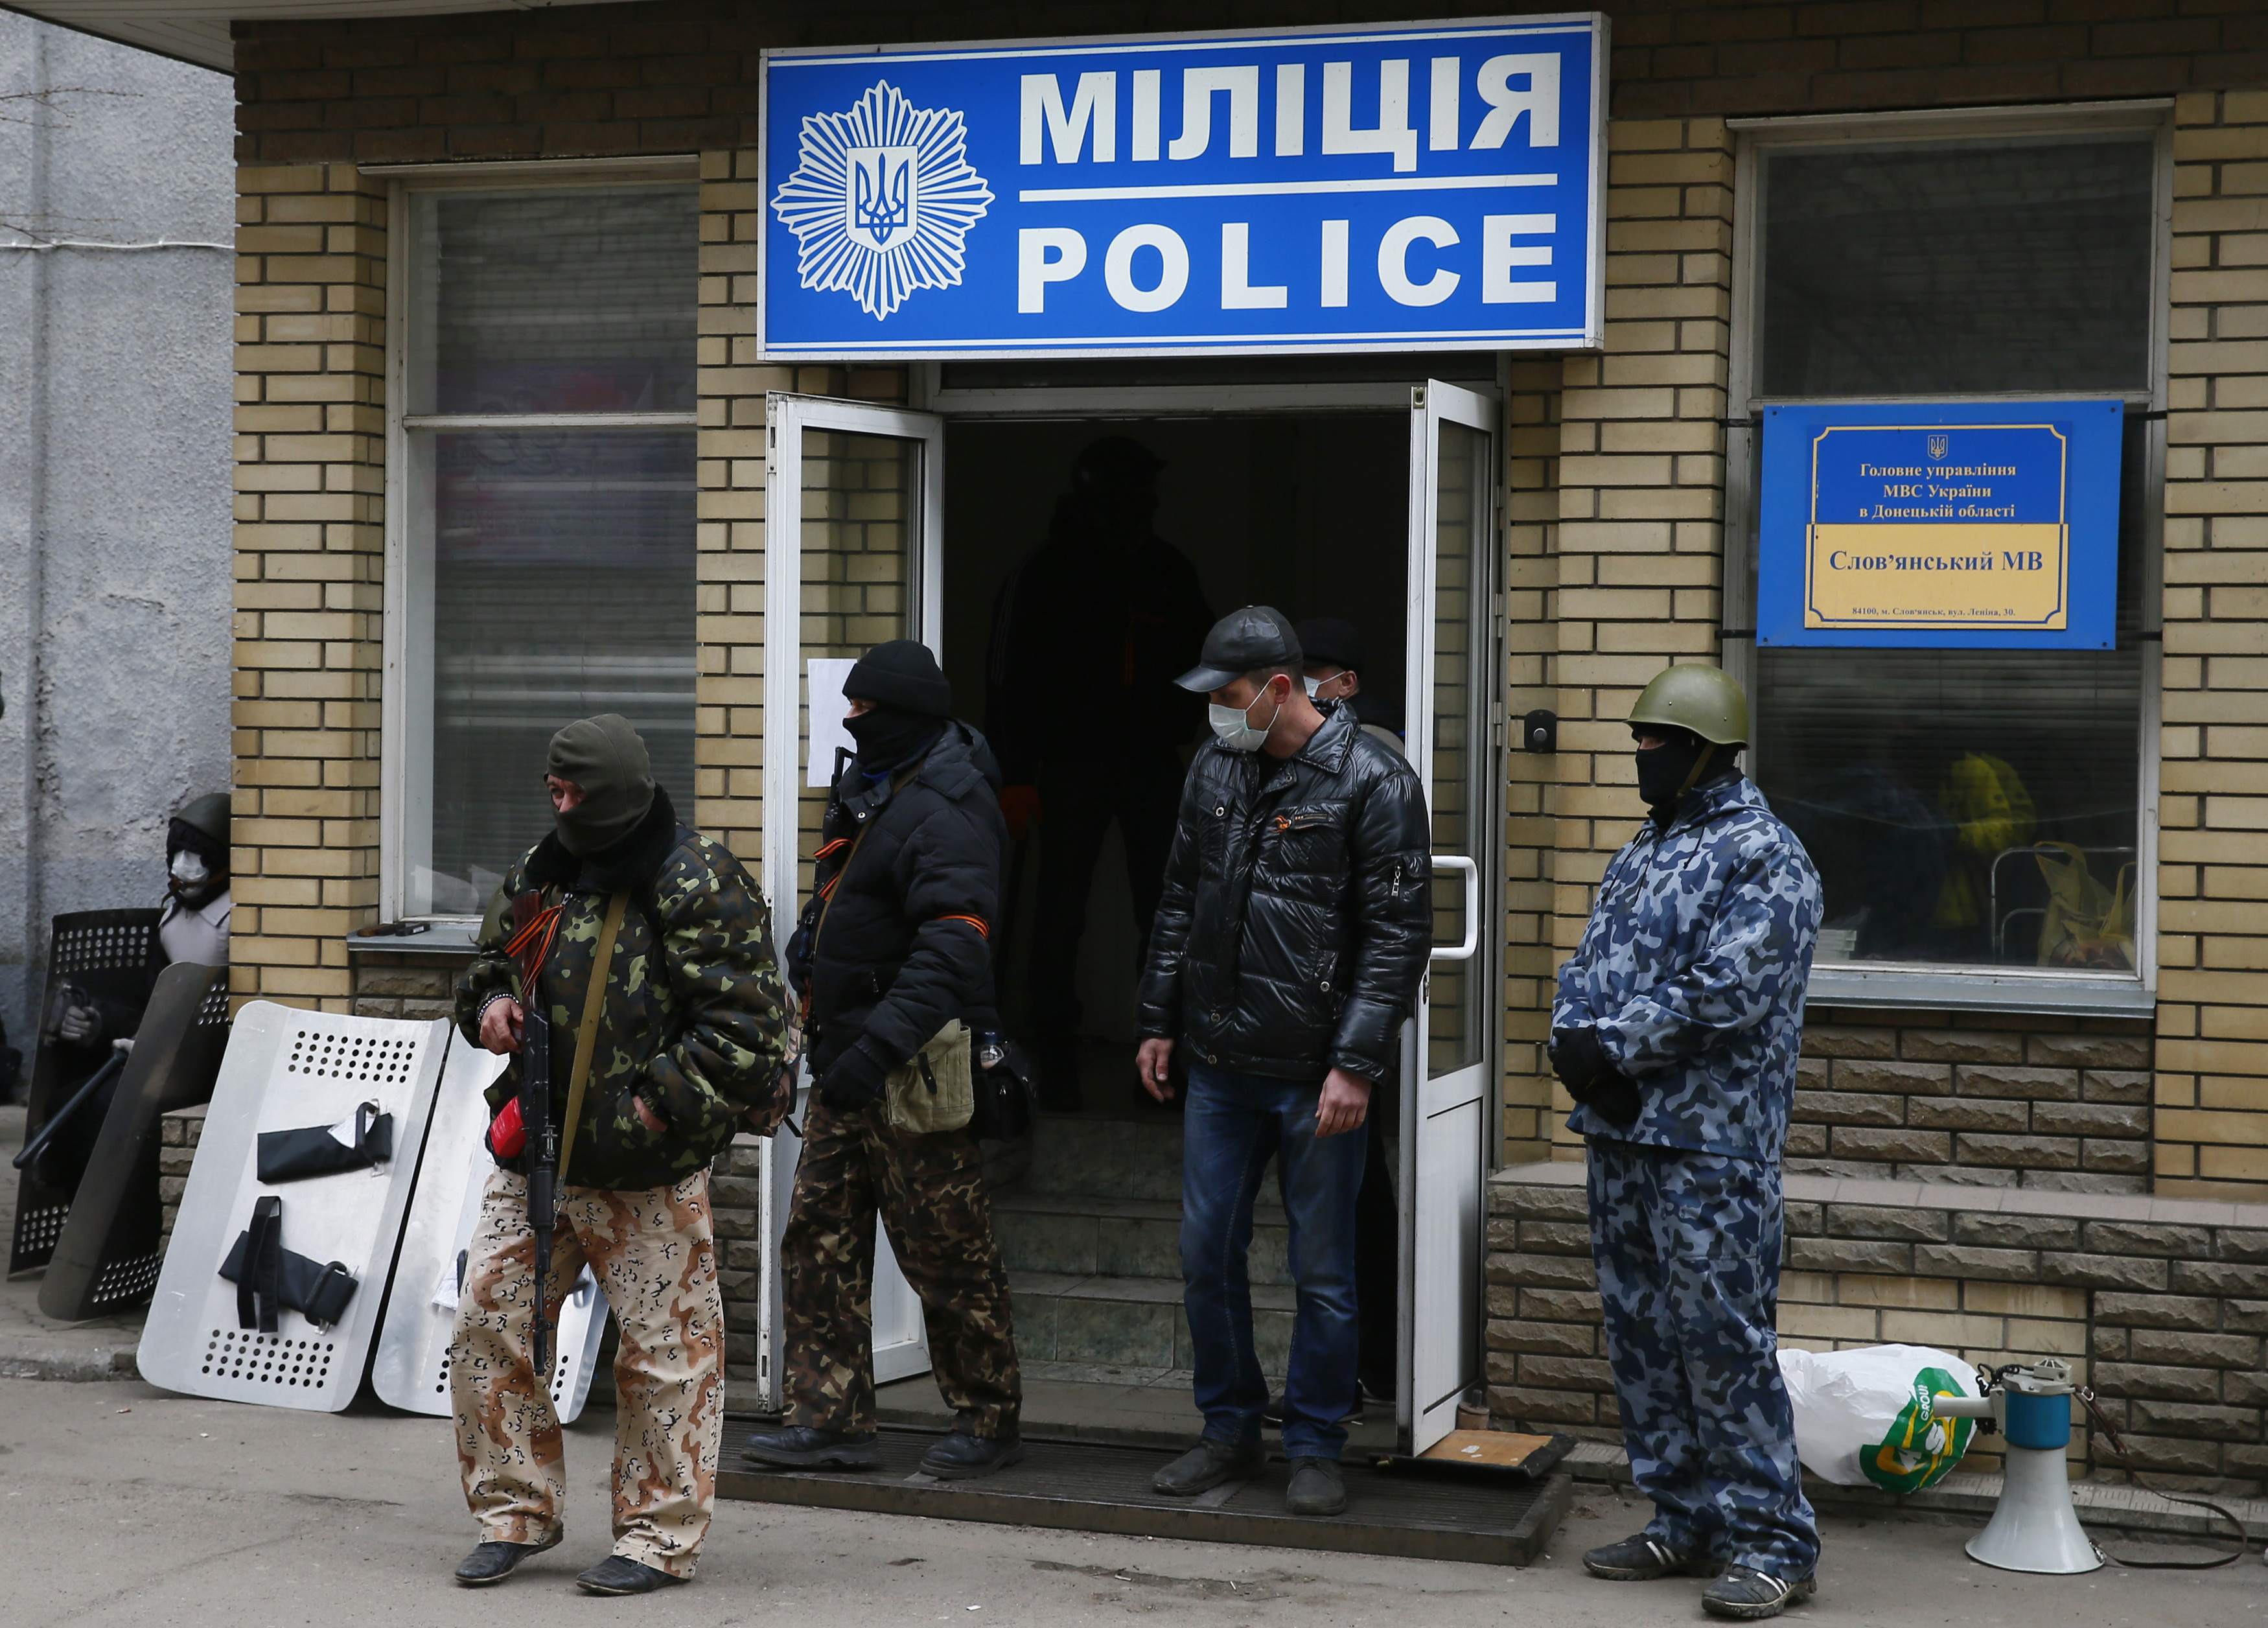 Armed men stand in front of the police headquarters building in Slaviansk, April 12, 2014. At least 15 armed men seized the police headquarters in the eastern Ukrainian city of Slaviansk on Saturday, extending takeovers of public building by pro-Russian m